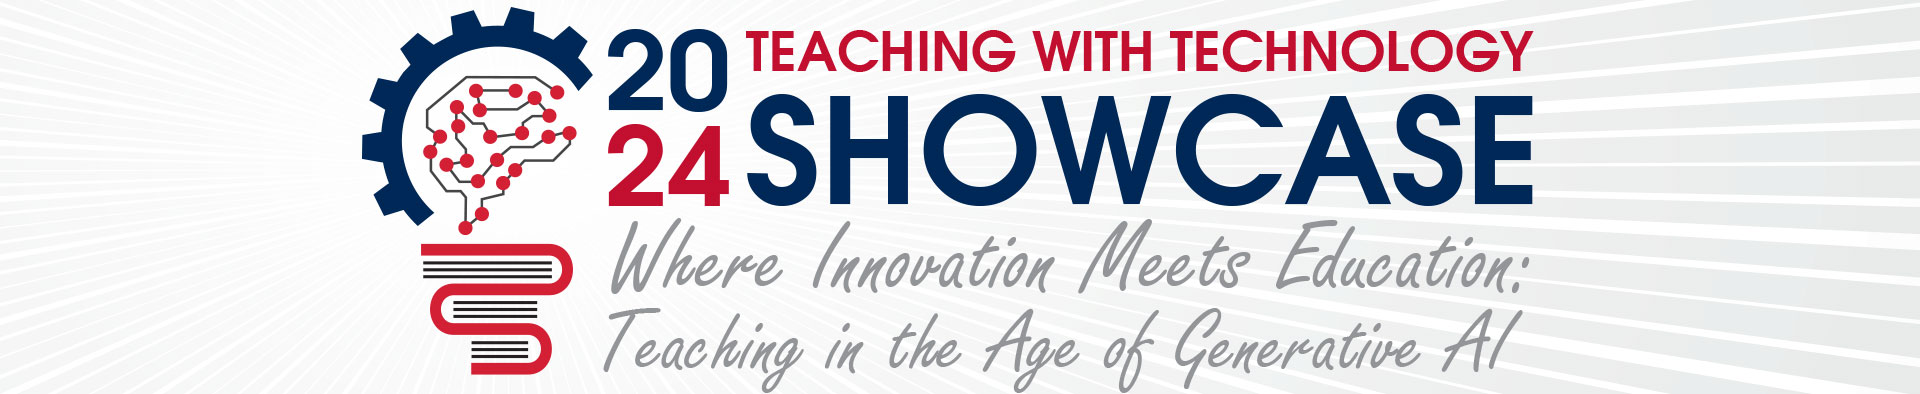 Teaching with Technology Showcase